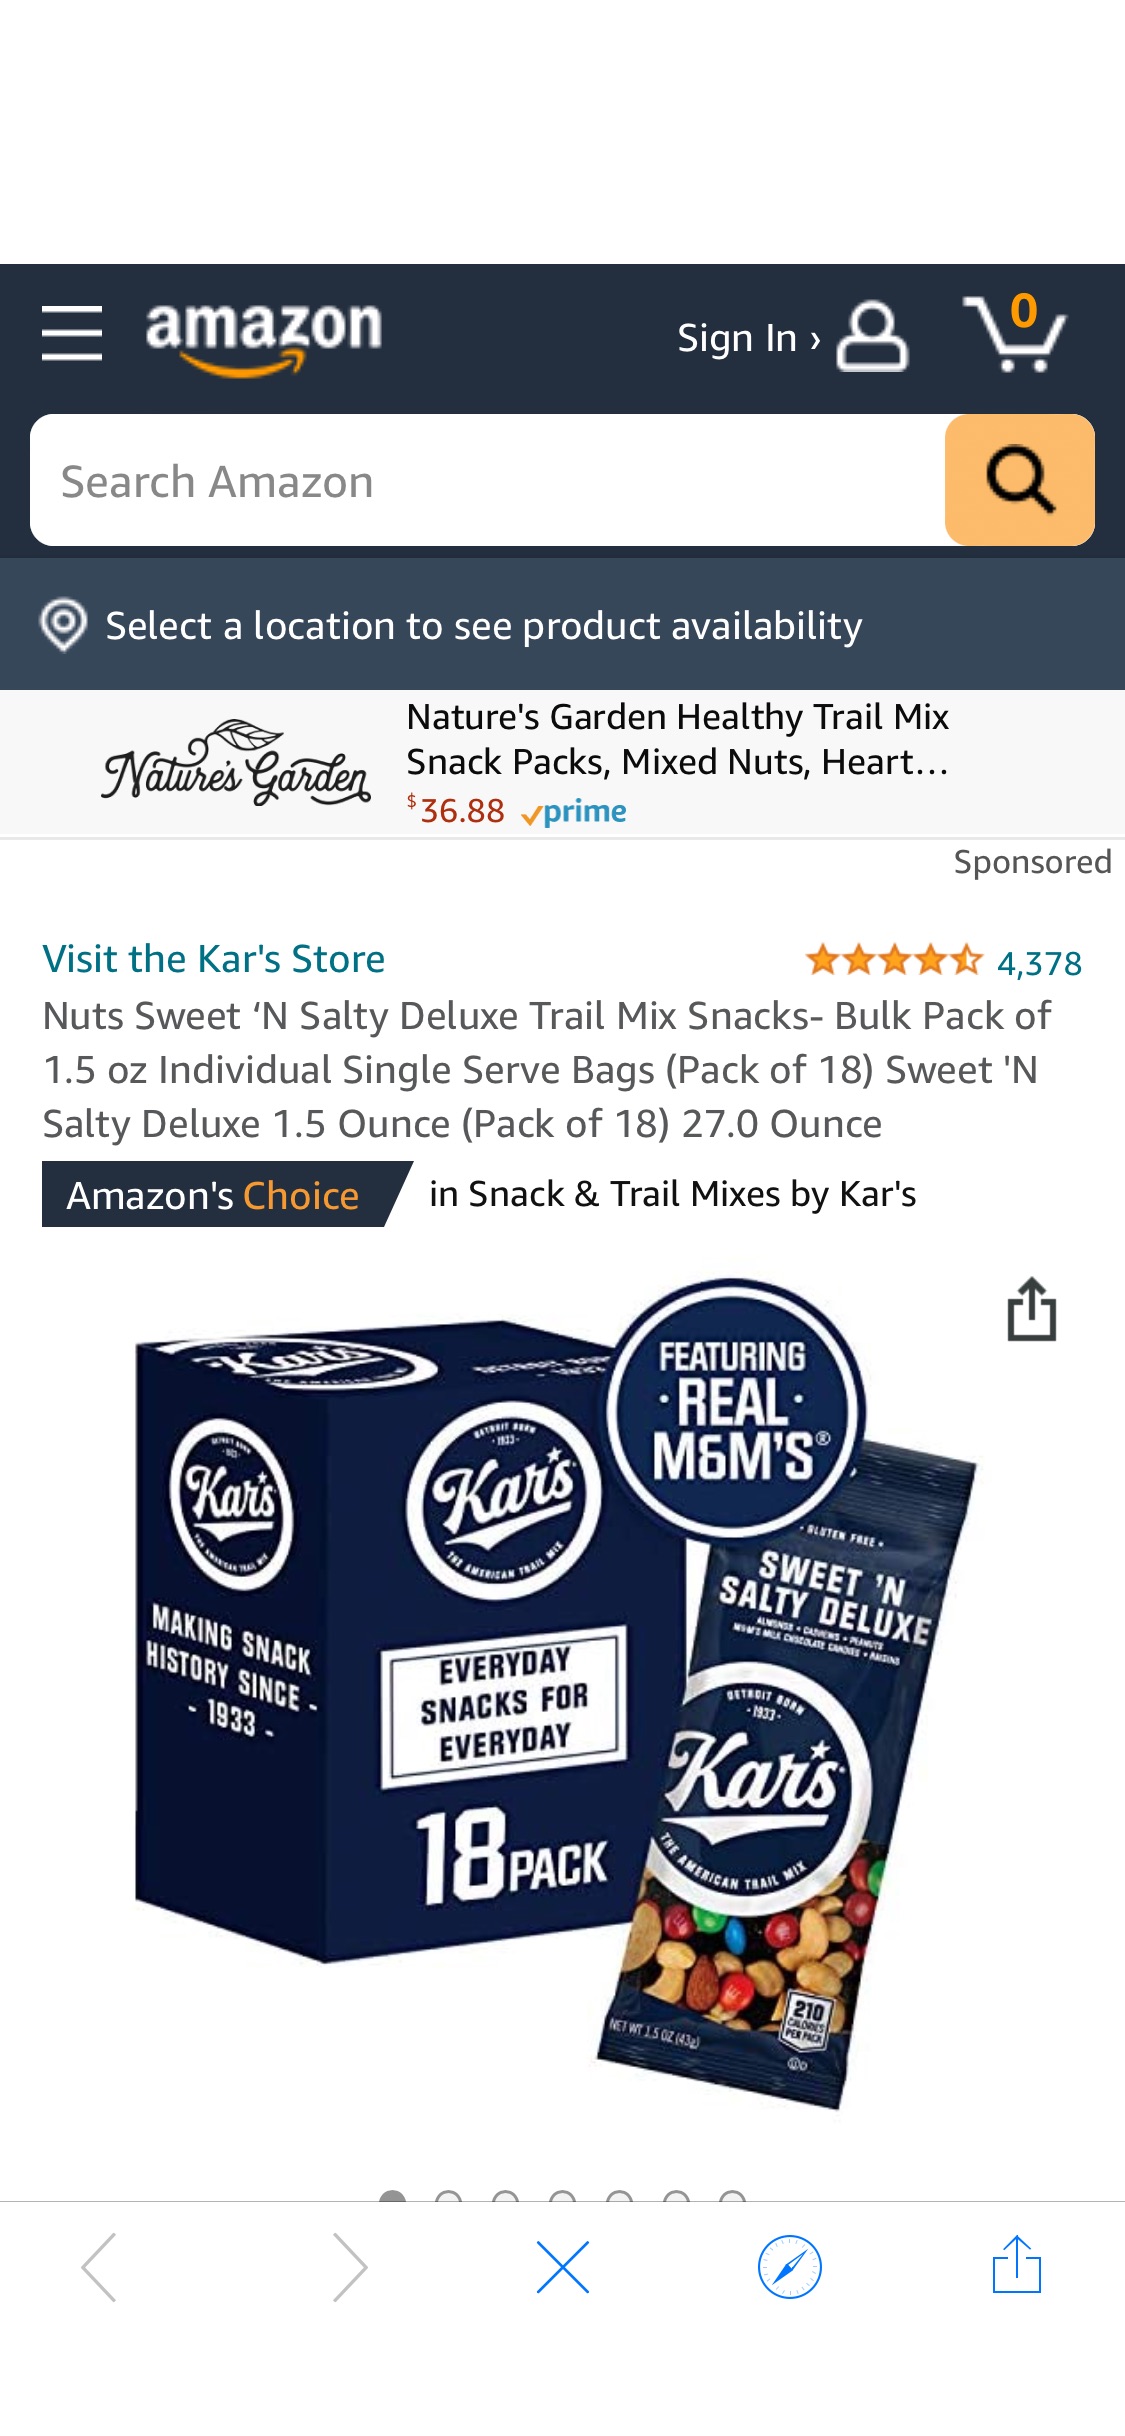 Amazon.com : Nuts Sweet ‘N Salty Deluxe Trail Mix Snacks- Bulk Pack of 1.5 oz Individual Single Serve Bags (Pack of 18) Sweet 'N Salty Deluxe 1.5 Ounce (Pack of 18) 27.0 Ounce : 坚果零售包Everything Else